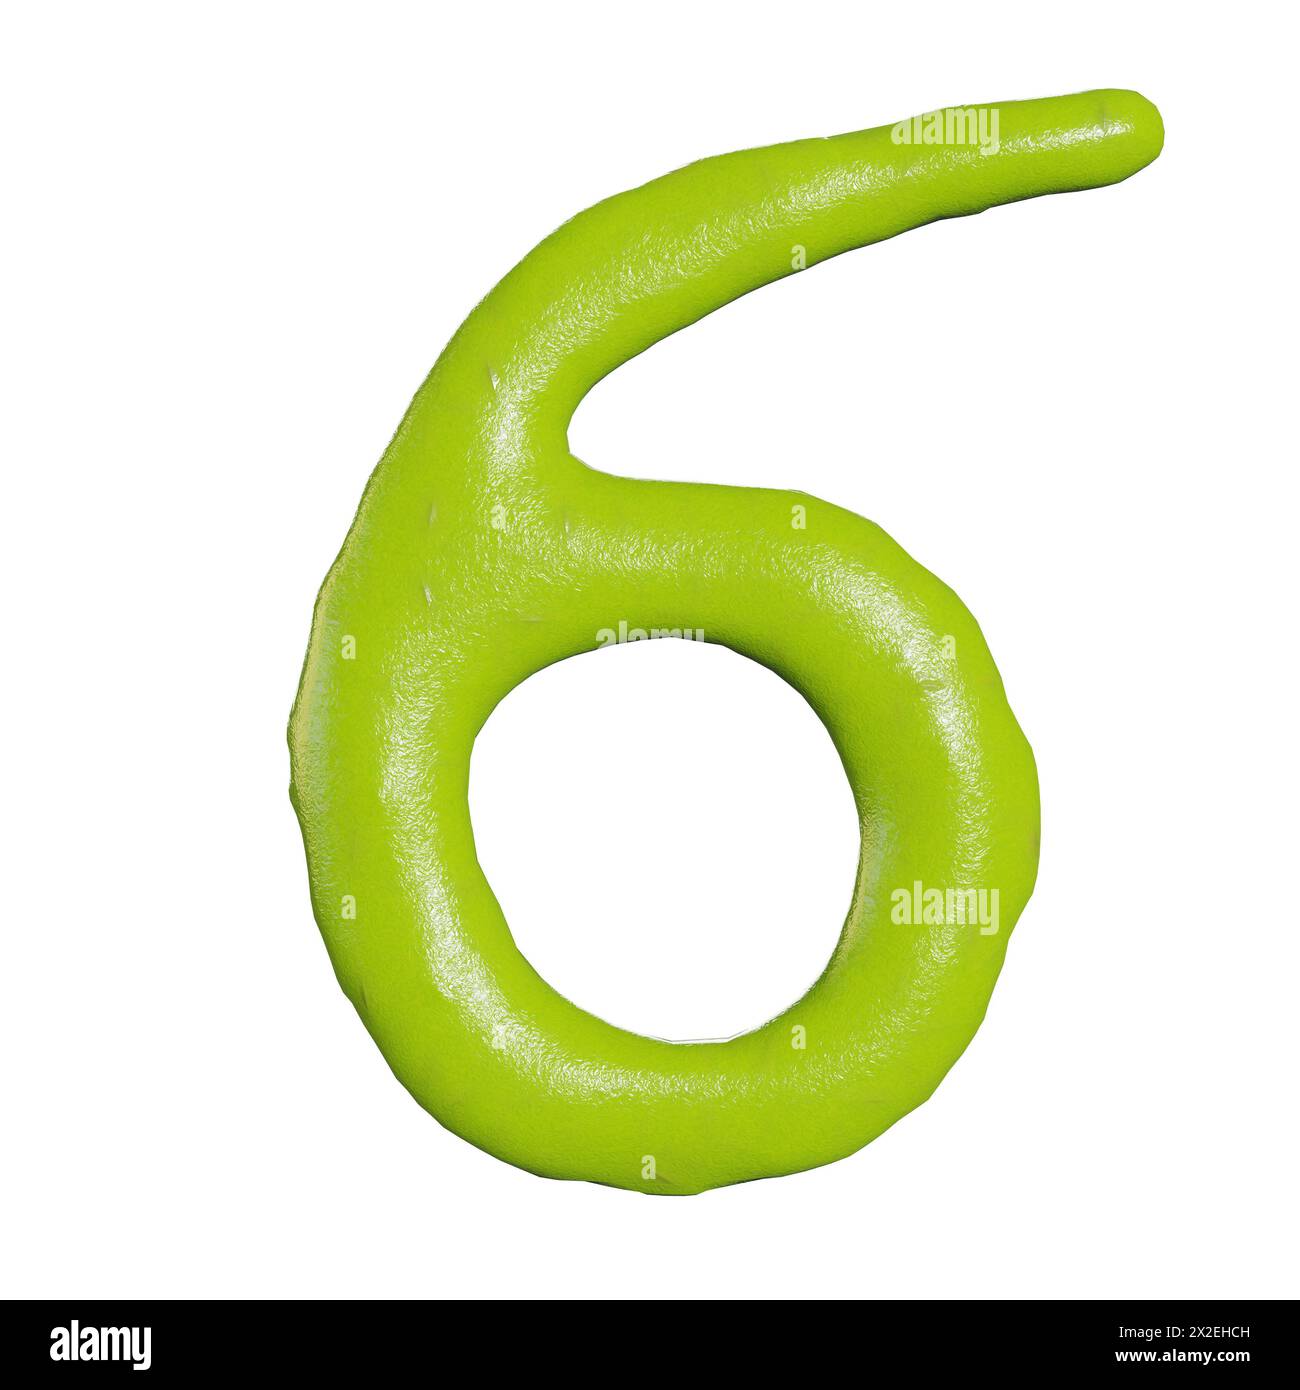 3d render of isolated wasabi numbers on white background Stock Photo